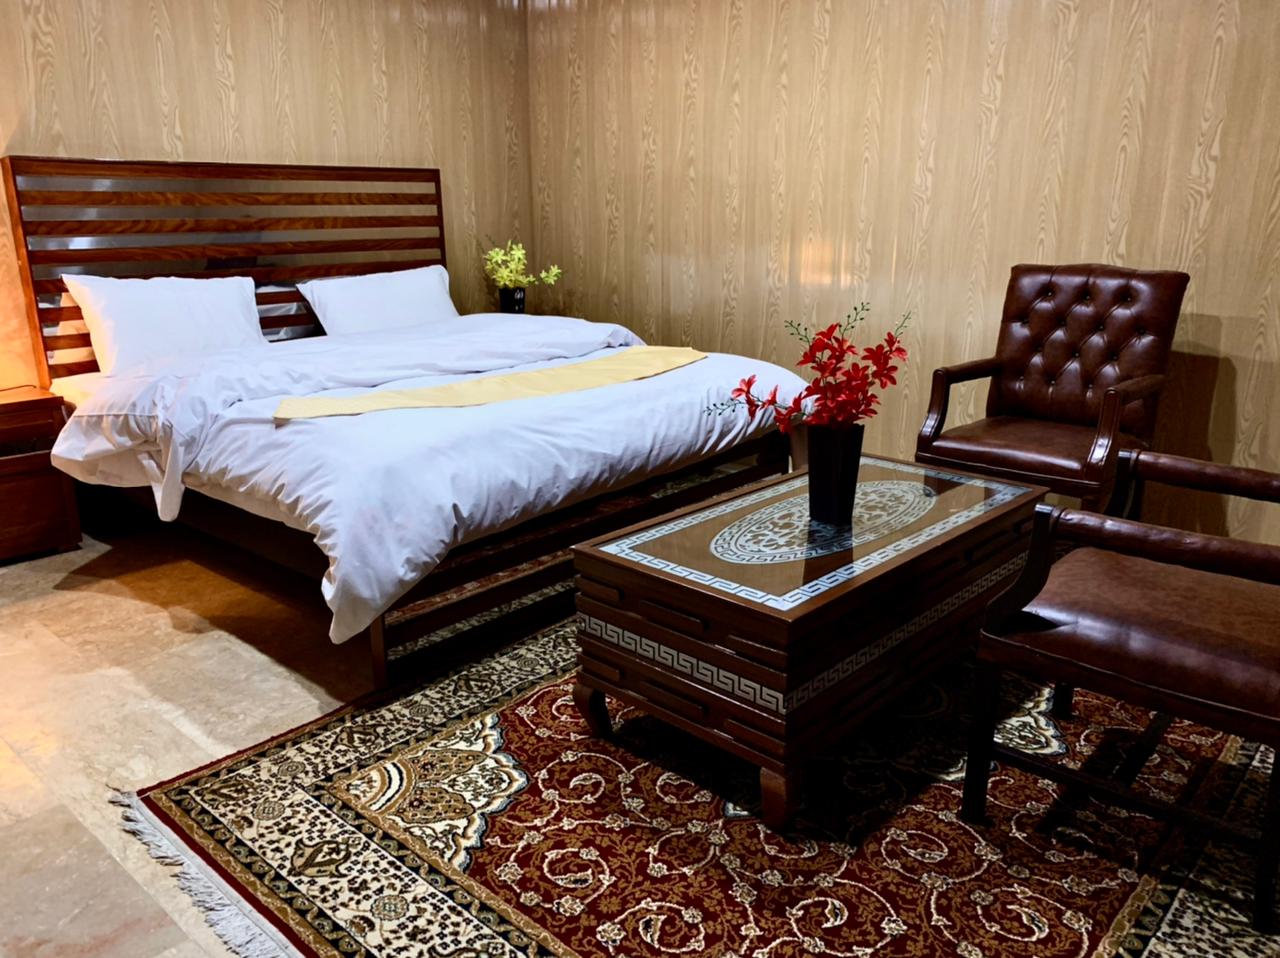 Double bed room of hotel in Rupal Valley Astore - Rozefstourism